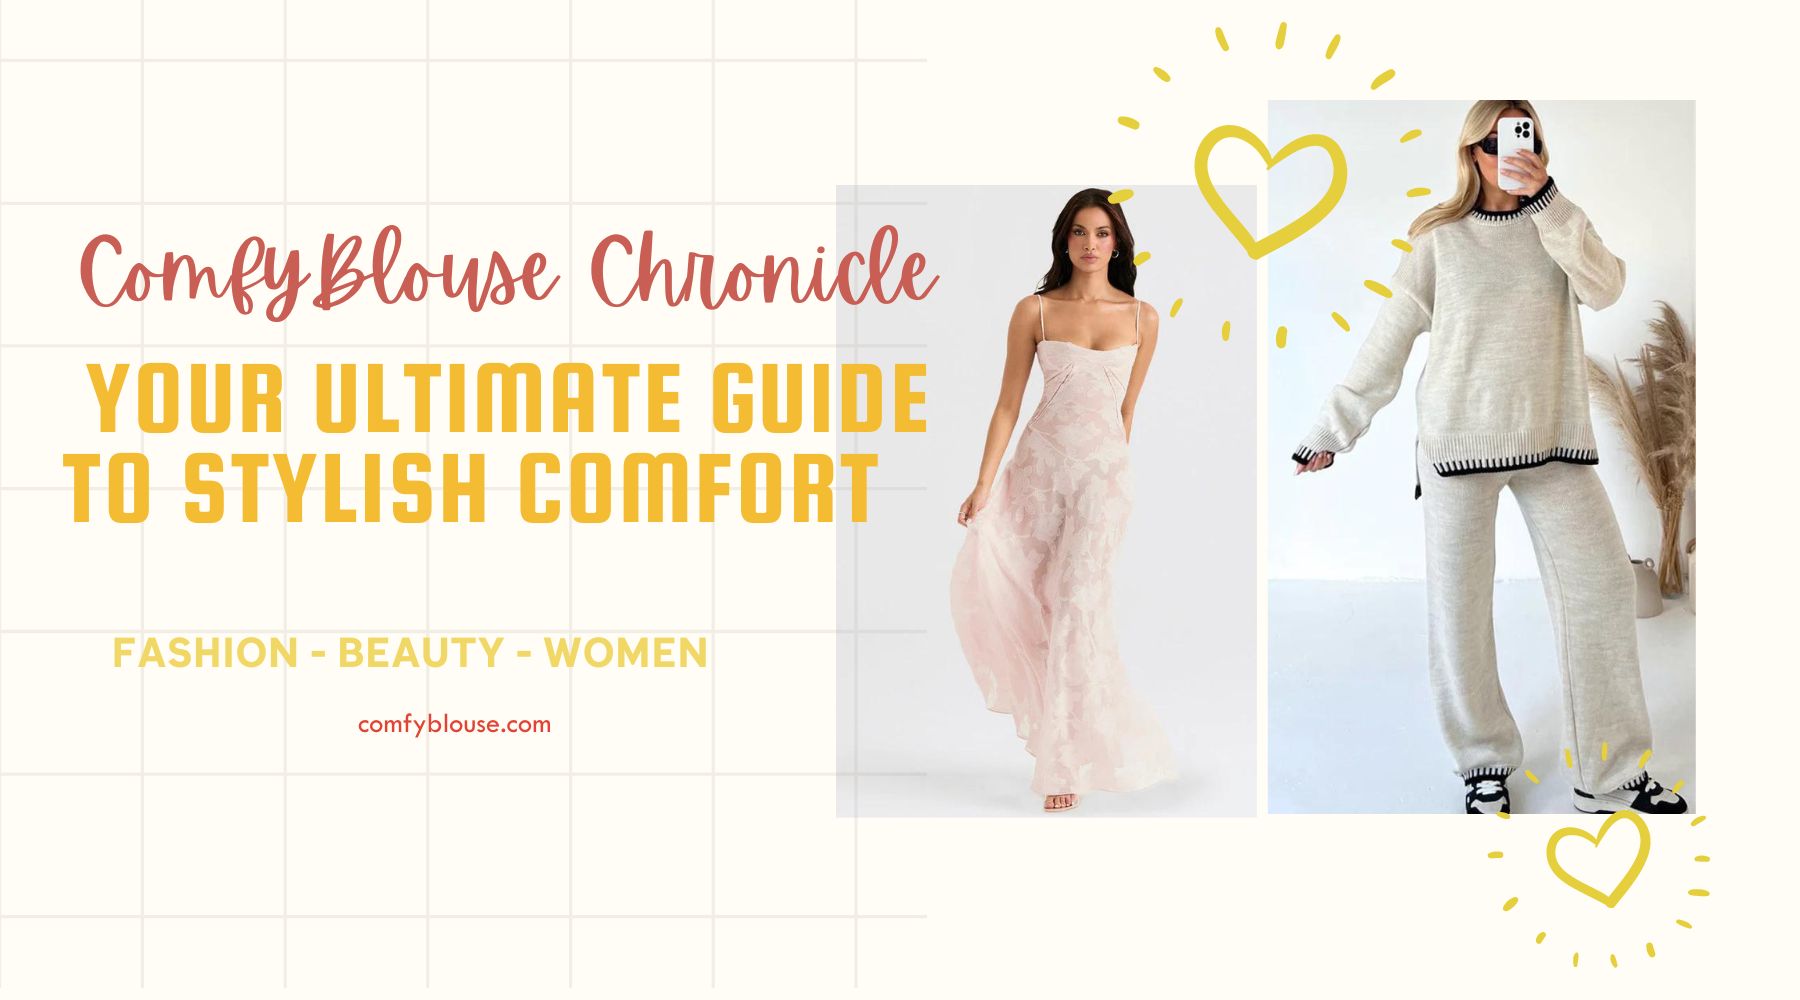 ComfyBlouse Chronicles: Your Ultimate Guide to Stylish Comfort